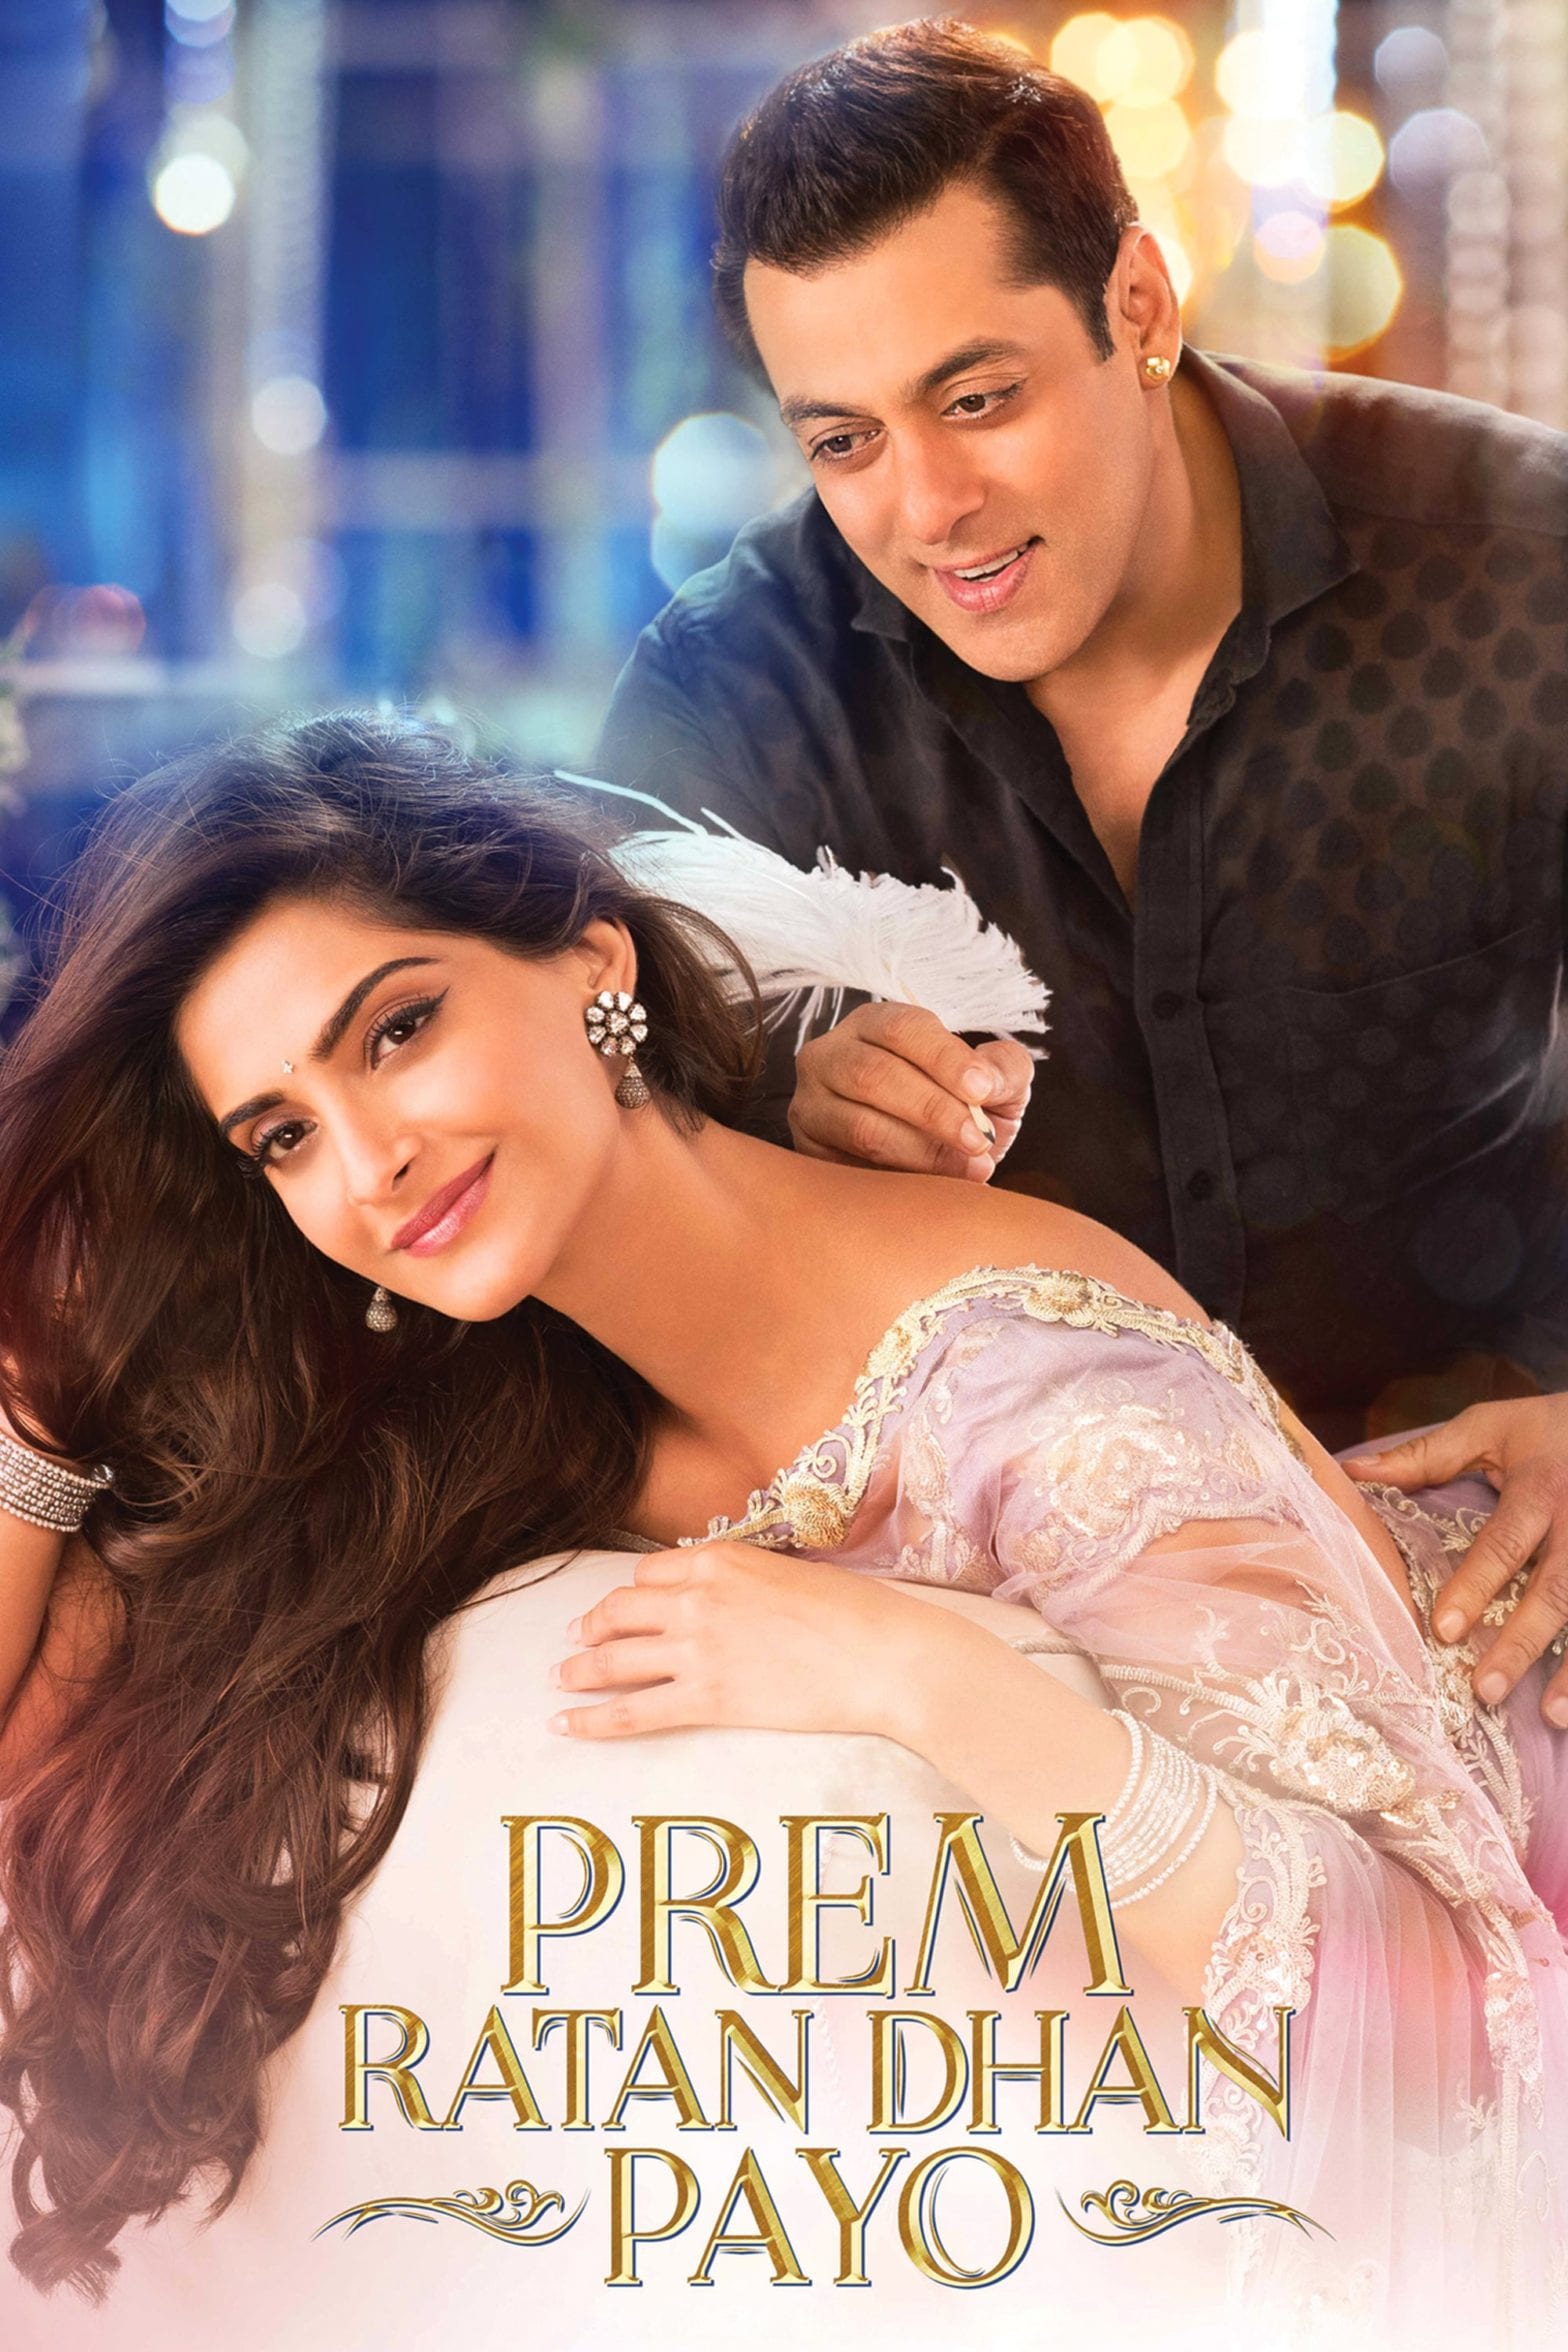 Poster for the movie "Prem Ratan Dhan Payo"